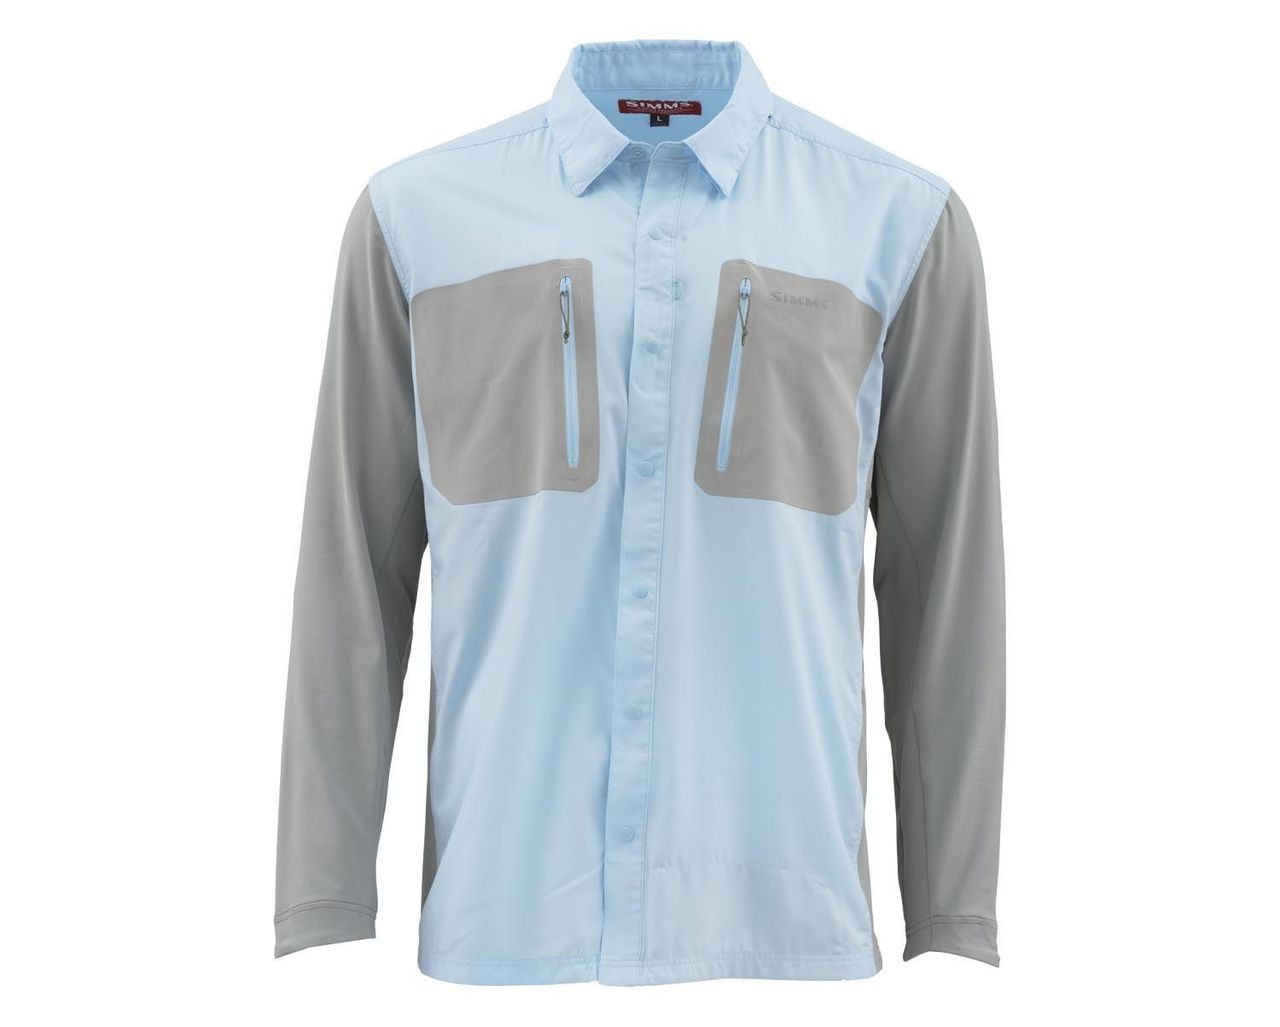 Simms Long Sleeve Blue Fishing Shirts & Tops for sale